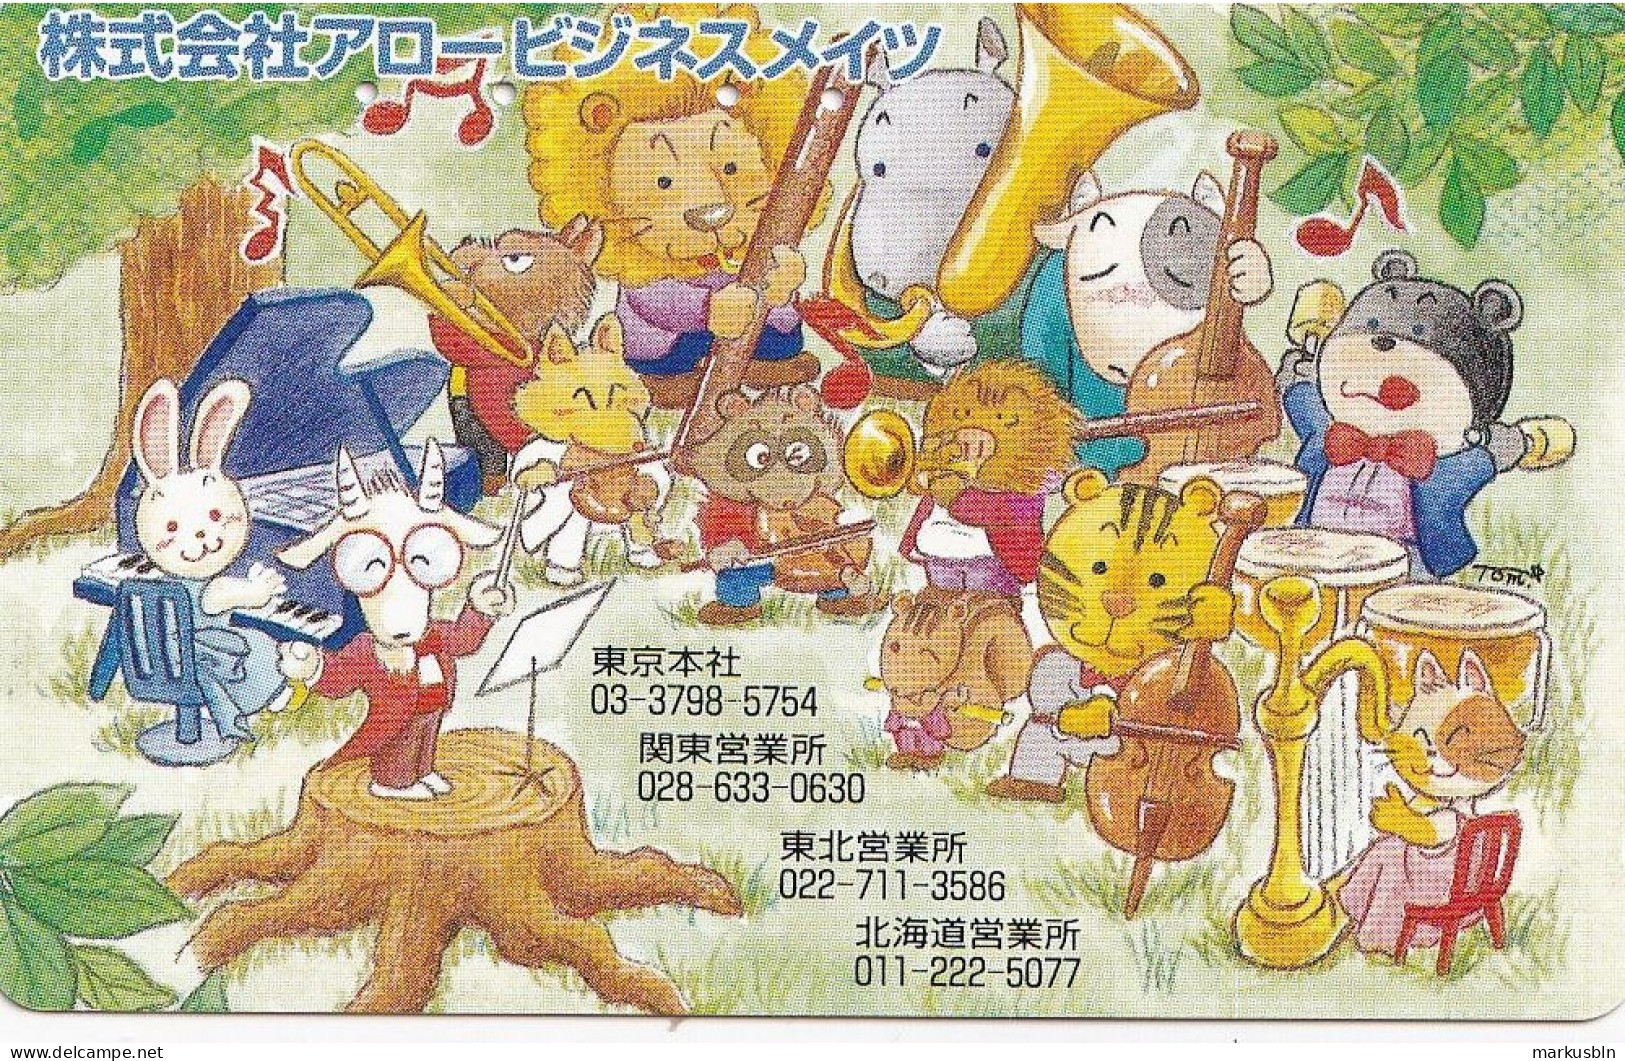 Japan Tamura 50u Old Private 110 - 016 Drawing Music Rabbit Racoon Tiger Hippo Lion Orchestra - Japon